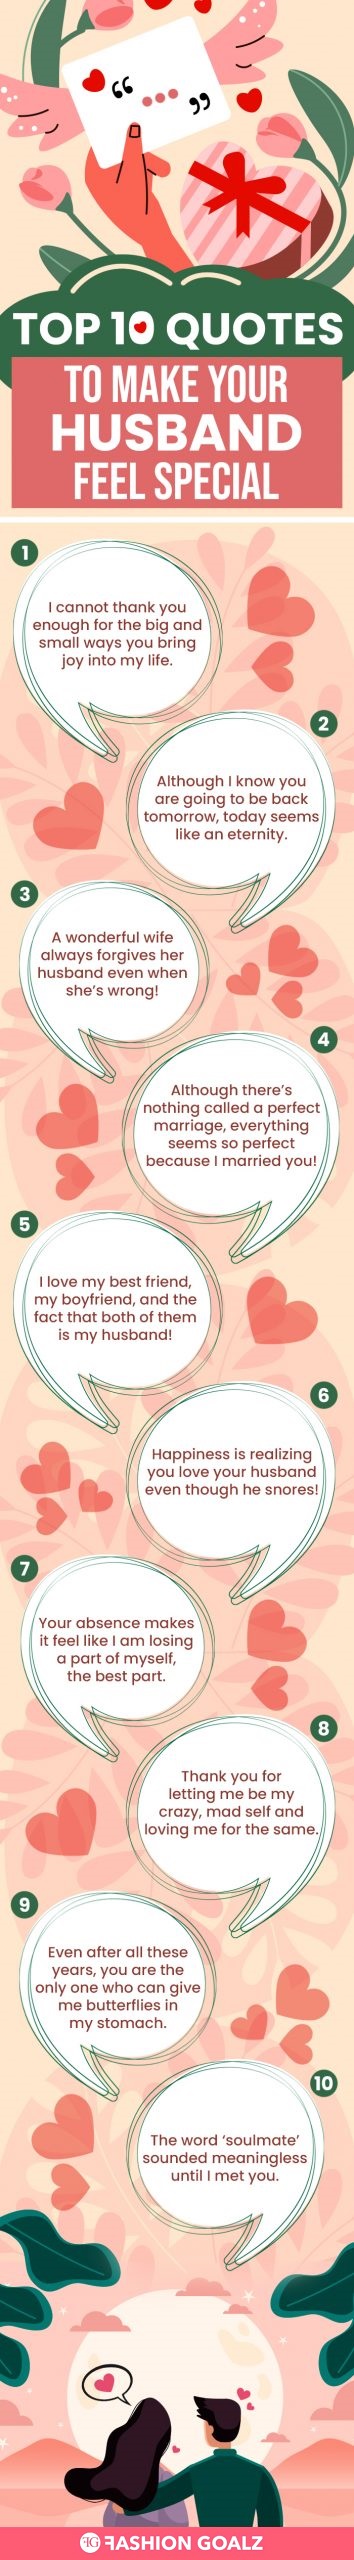 top 10 quotes to make your husband feel special (infographic)